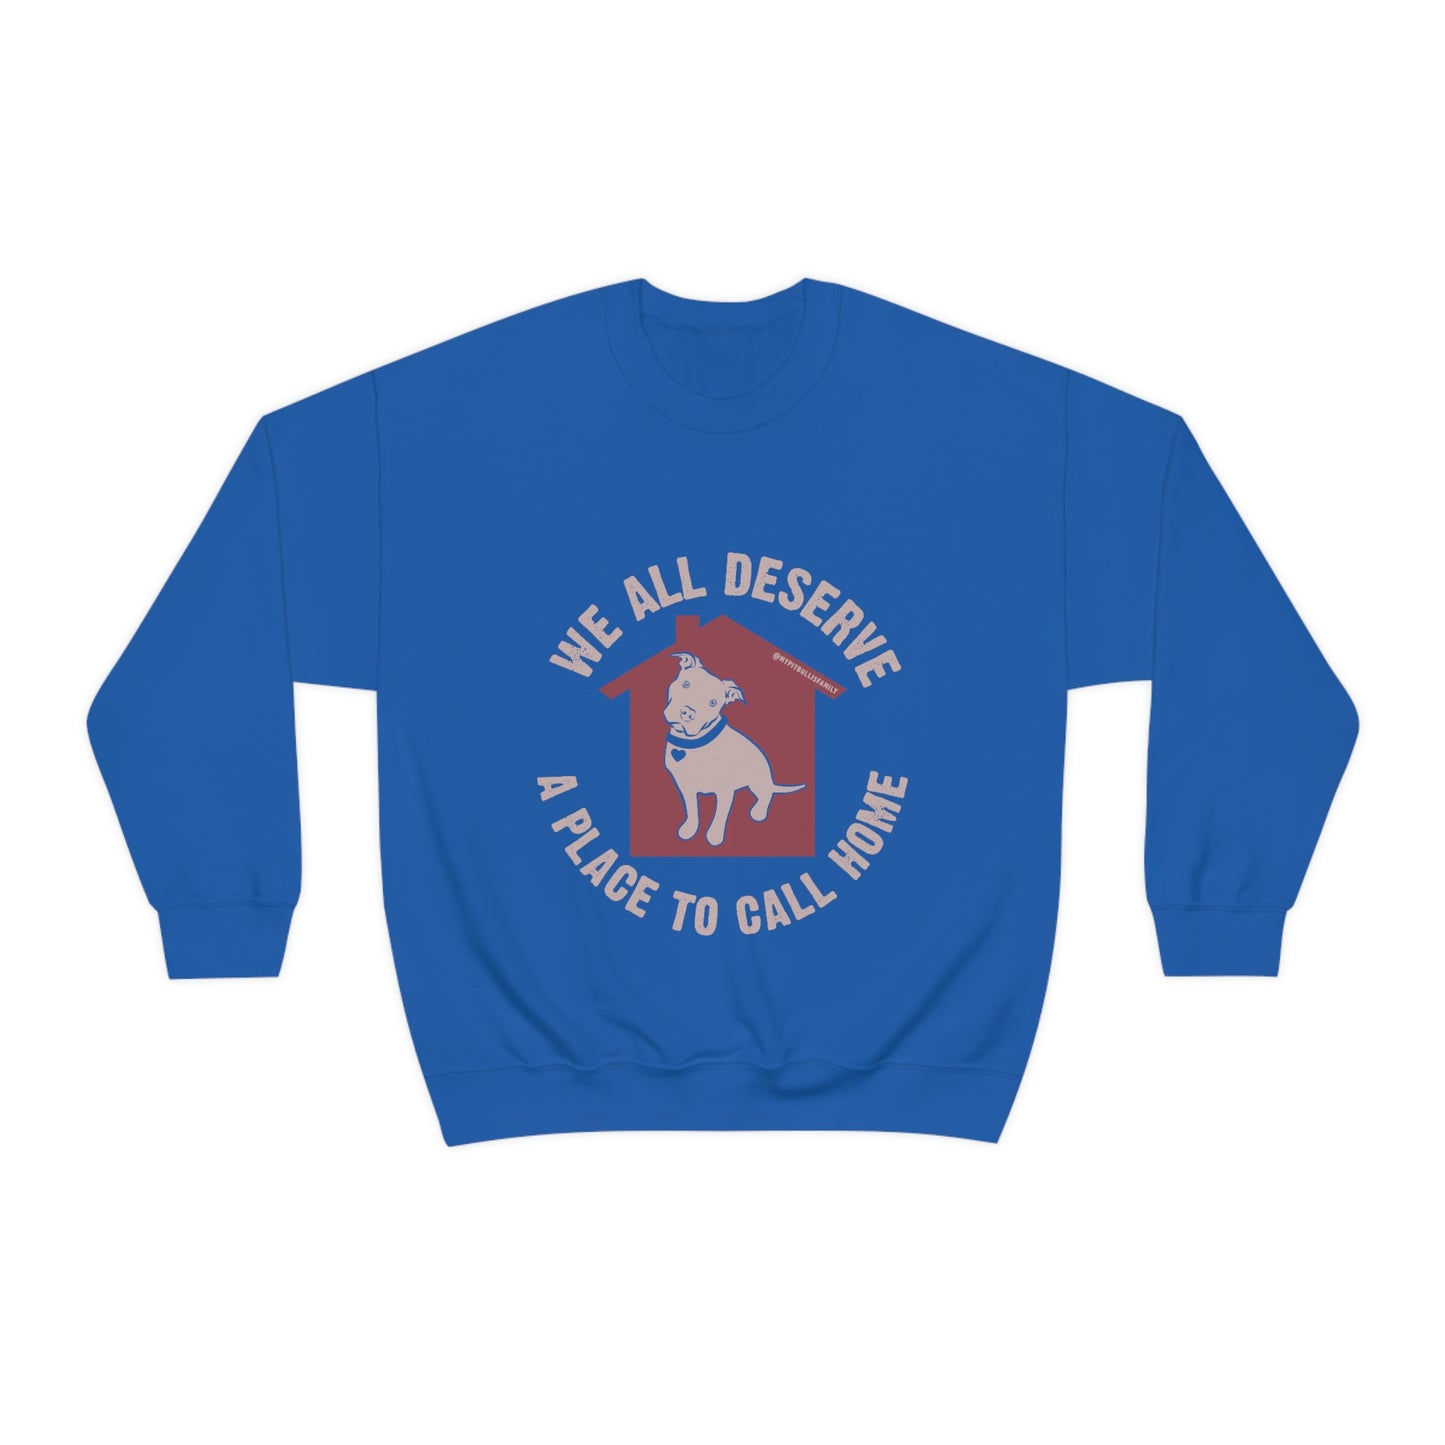 We All Deserve a Place to Call Home Unisex Heavy Blend™ Crewneck Sweatshirt